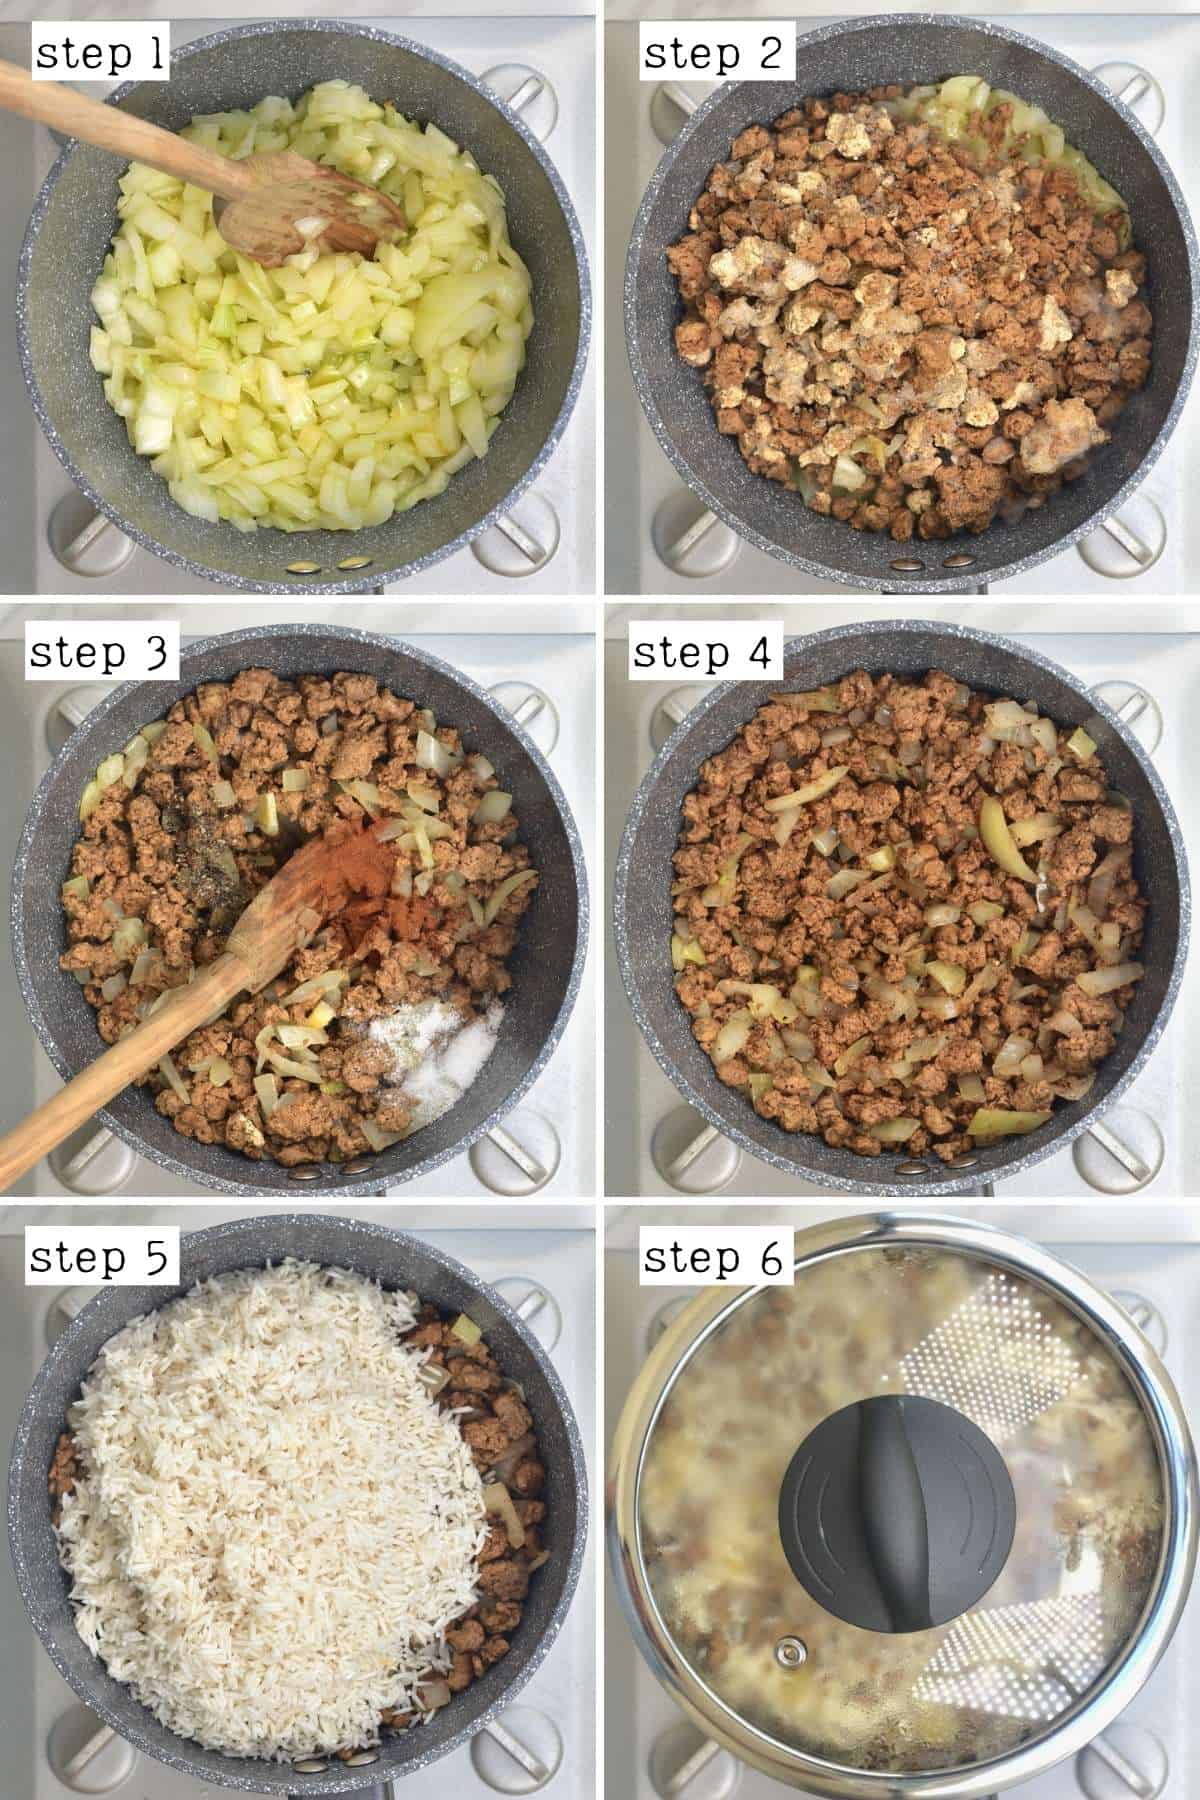 Steps for cooking mince and rice for maqluba